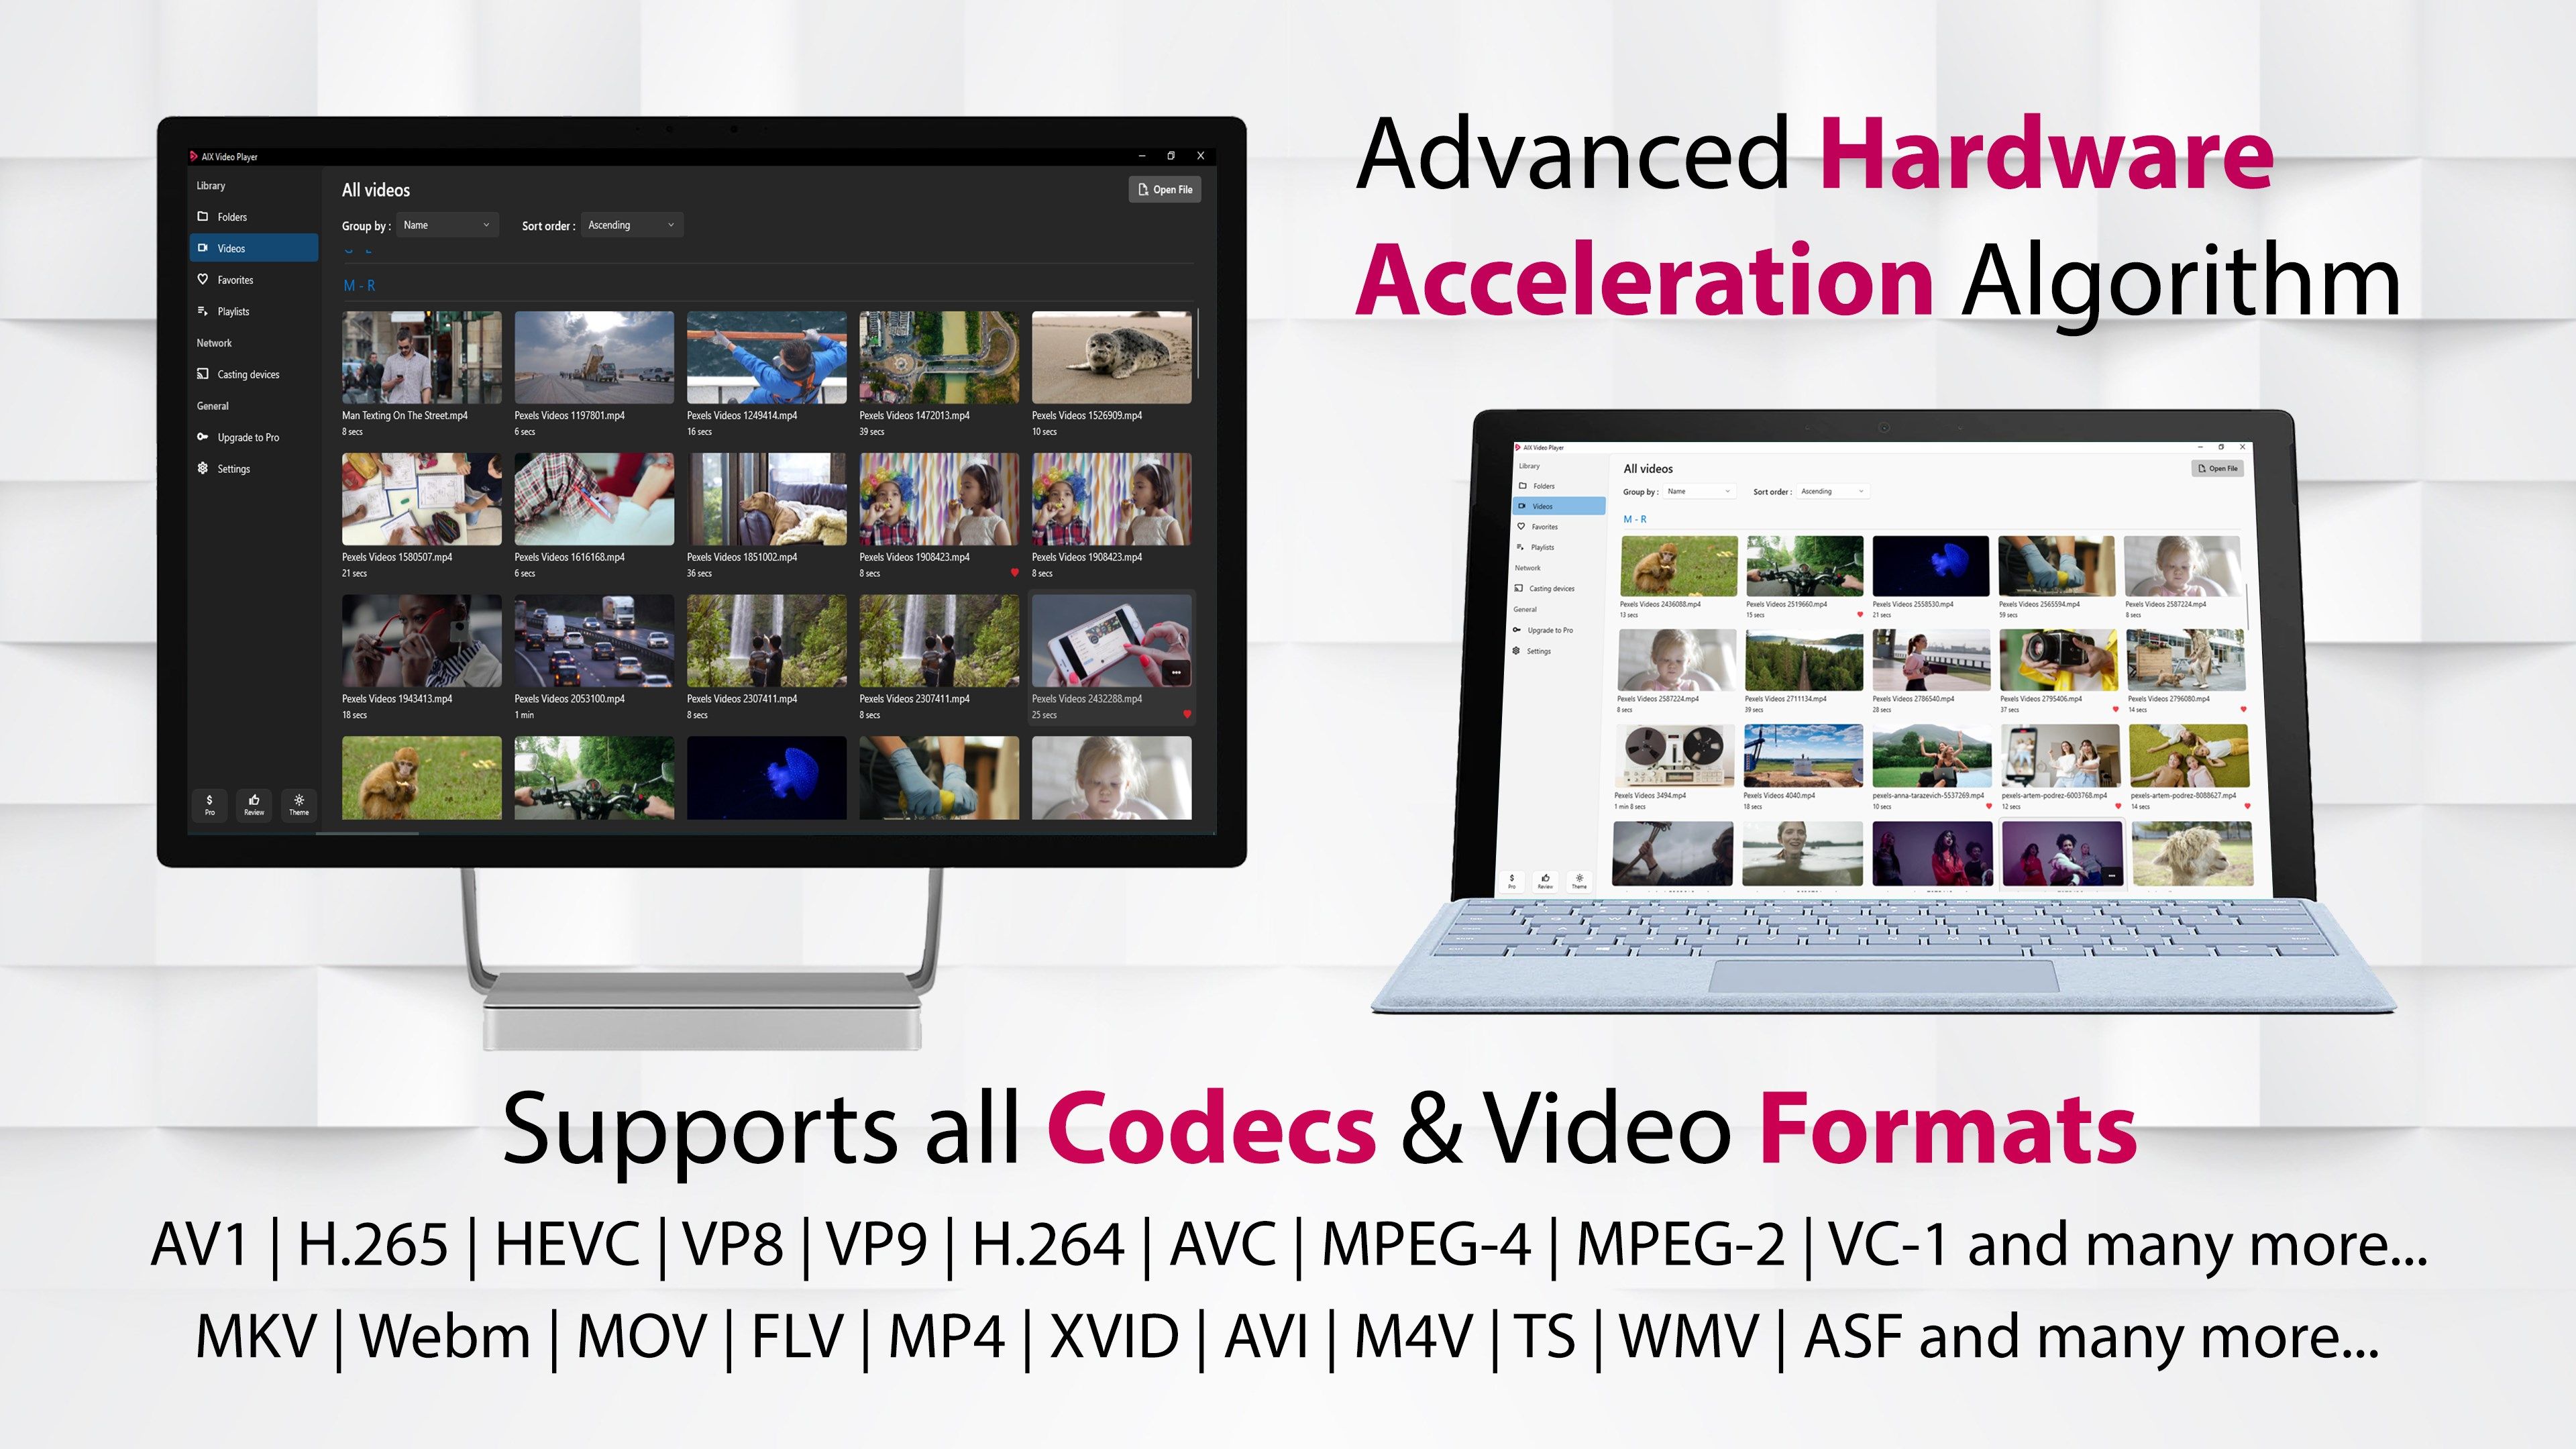 Advanced Hardware Acceleration Algorithms (HW+) for Video Decoding, Video Casting, and Video Transcoding. These HW+ modules are optimized for NVIDIA, INTEL, and AMD Graphics